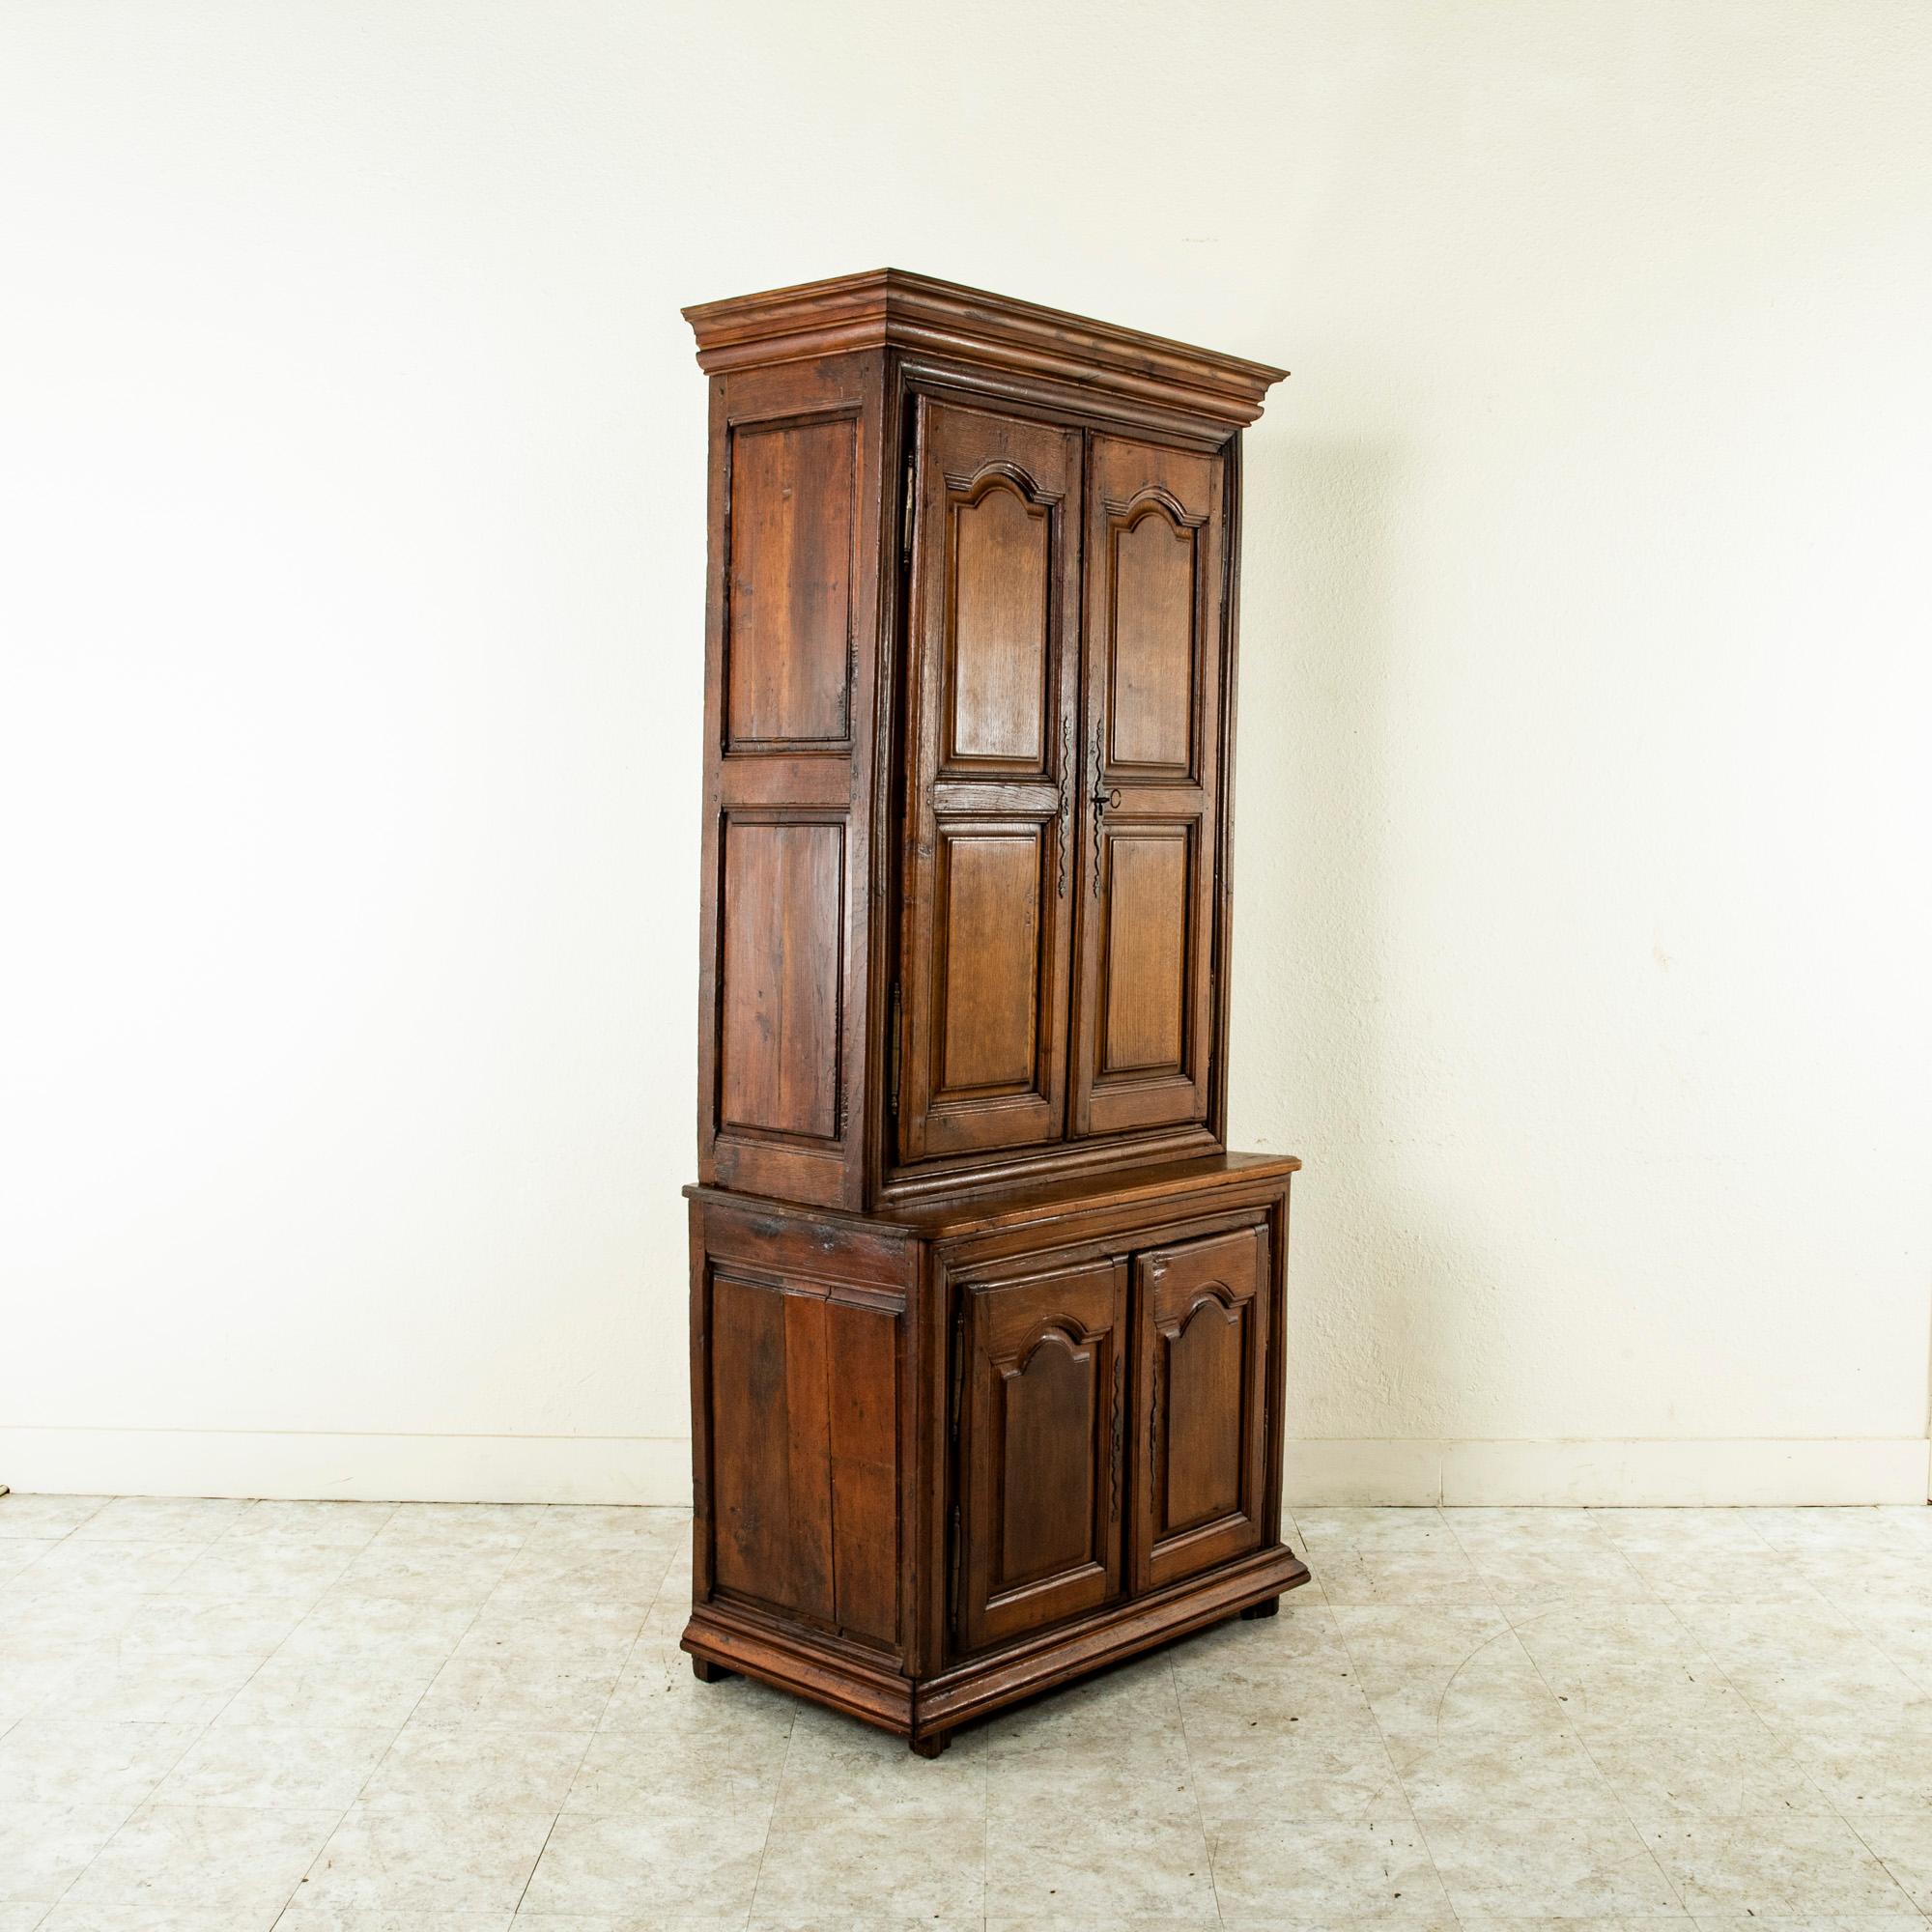 This small scale French Louis XIV period oak buffet deux corps or cabinet from the late seventeenth century is from the region of Normandy and features a narrow width of only 38 inches. Its deep relief hand pegged paneled doors and sides lend